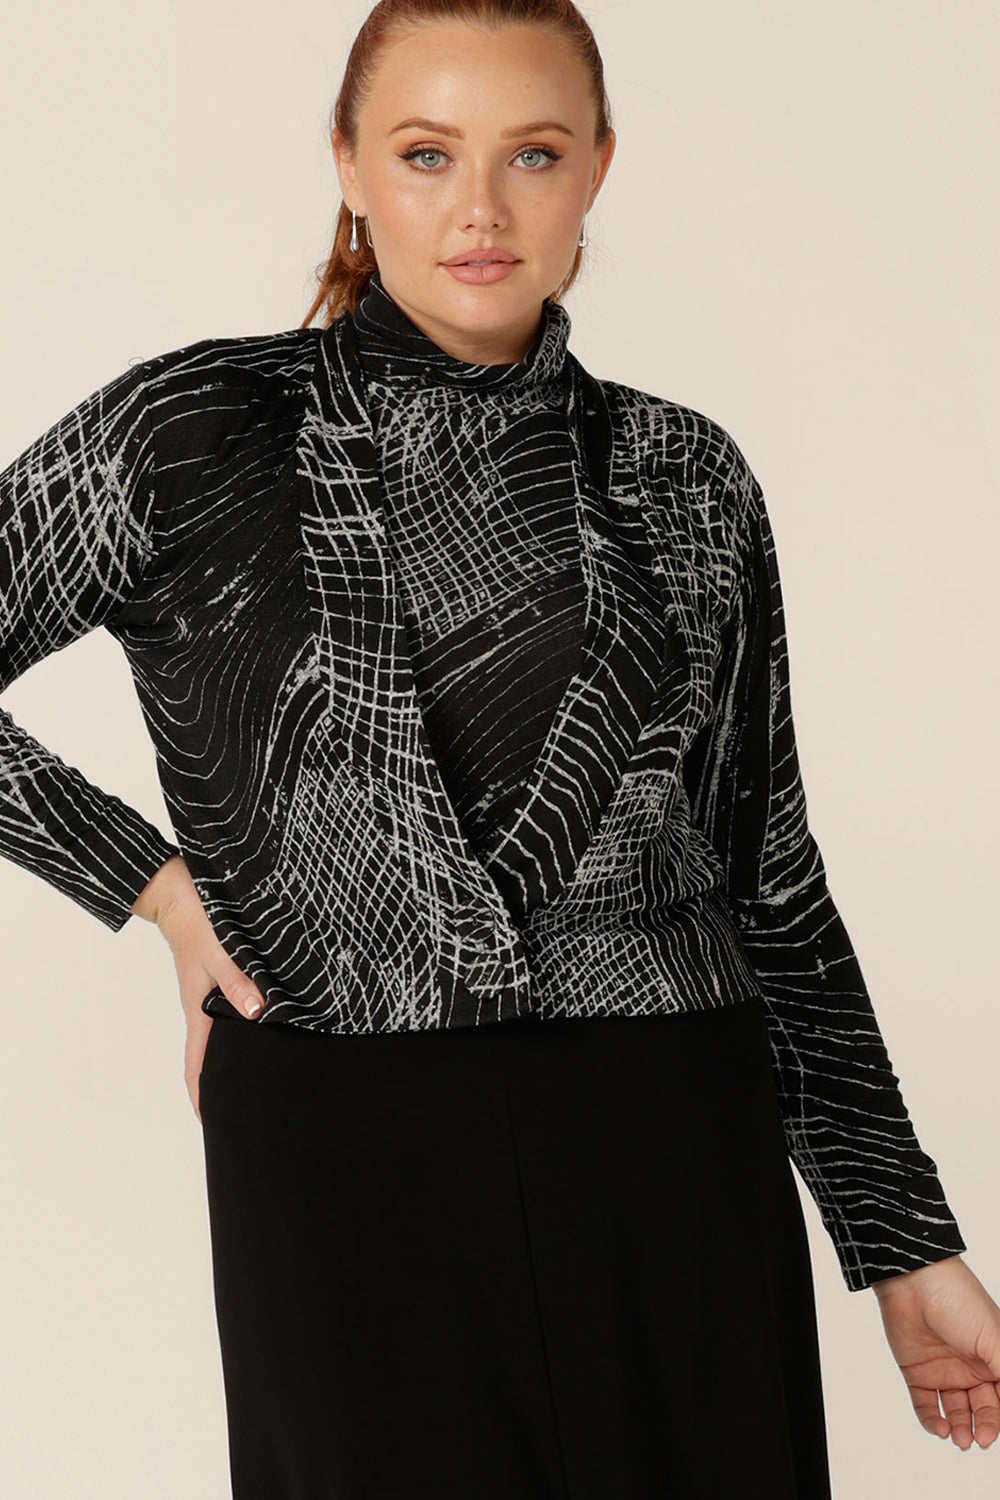 A blend of jacket and cardigan, this textured knit 'jacardi' is a good way to layer up for winter. Worn by a size 12 woman, this knit jacket is worn with a matching polo neck top to create a modern twinset. Shop this jacket now in an inclusive 8 to 24 size range.